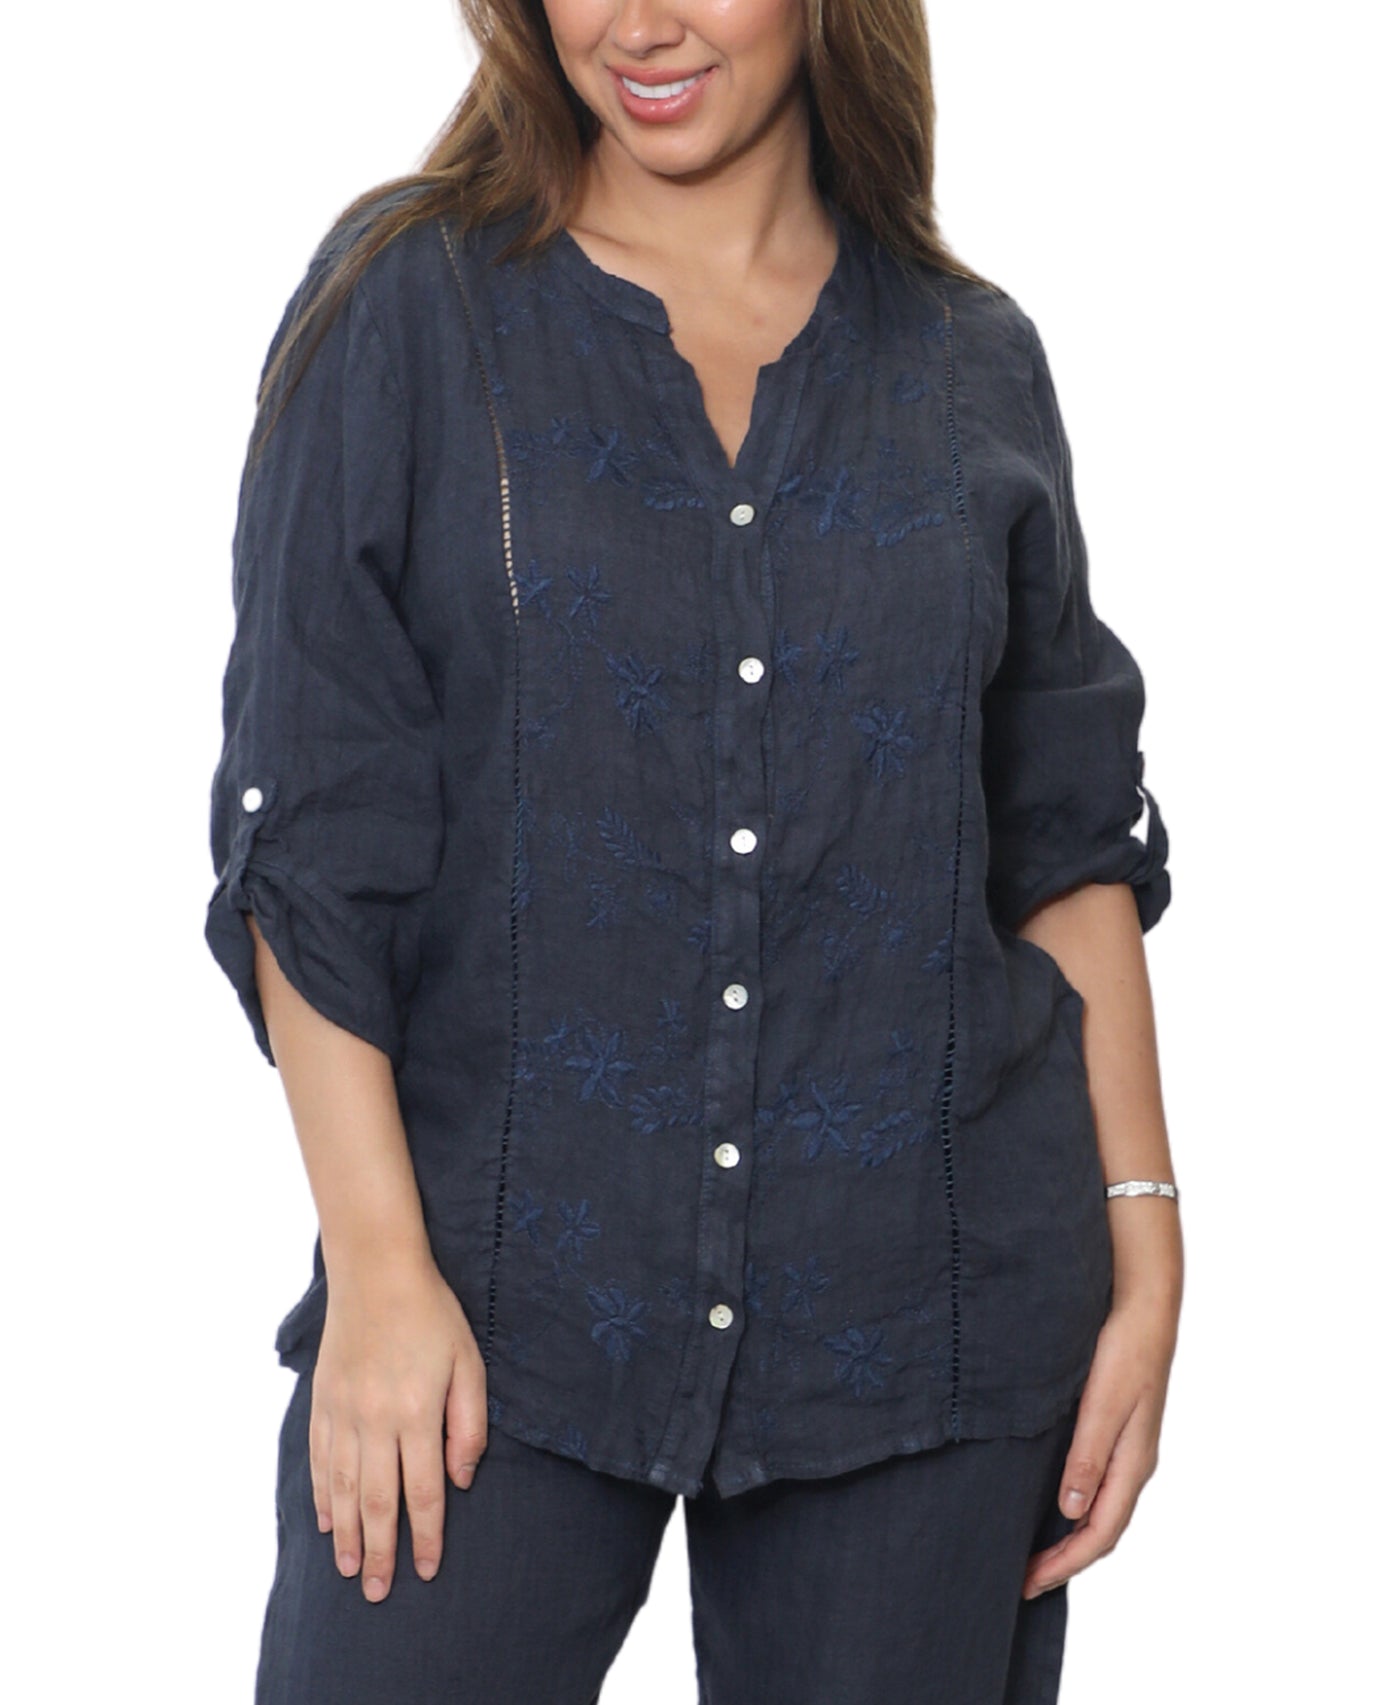 Linen Top w/ Embroidery image 1